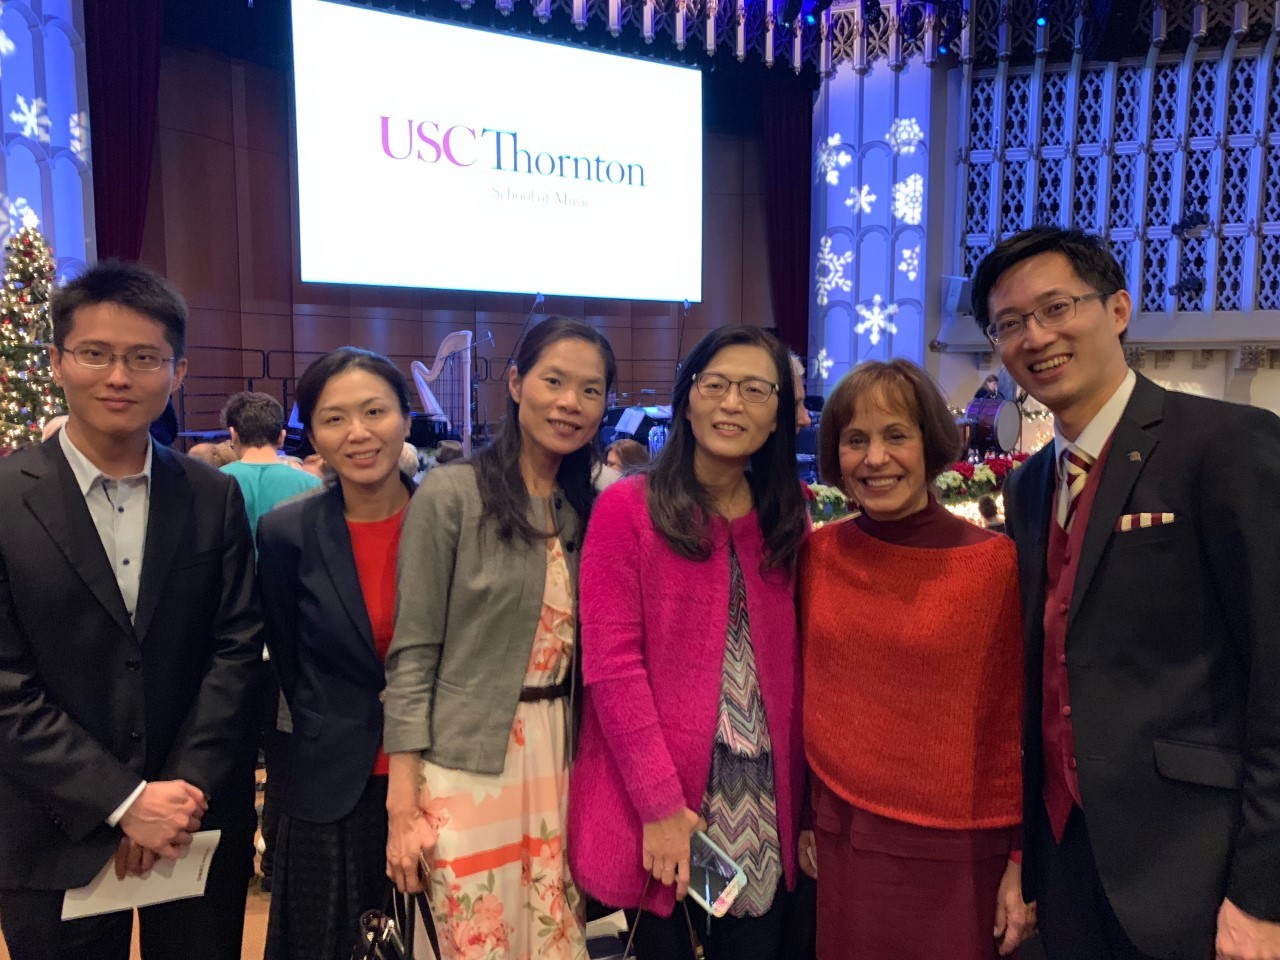 TECO in Los Angeles joins the USC Annual Gala Concert to Kick off the Holiday Season